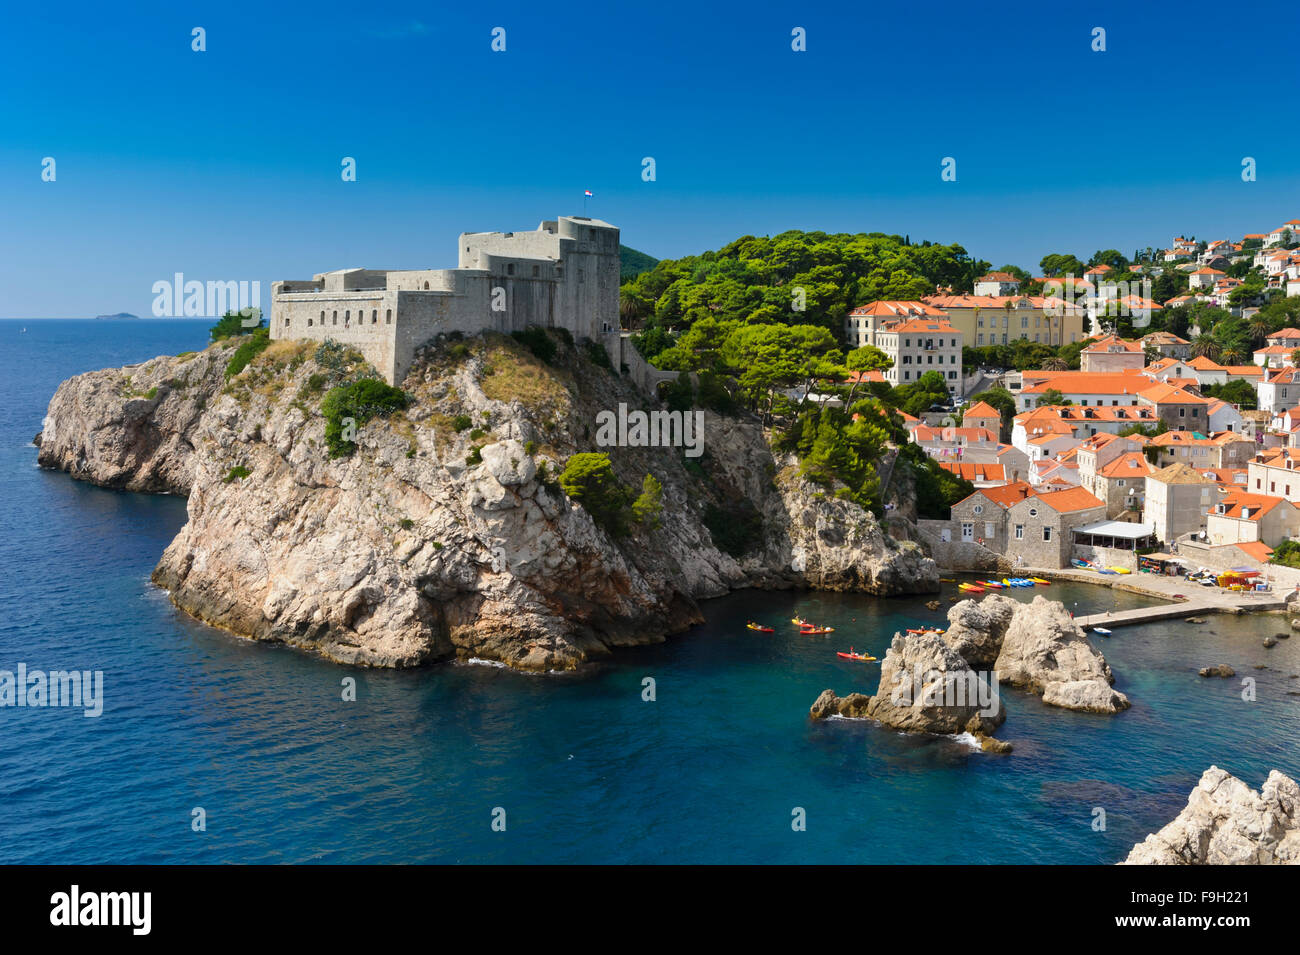 Fort Lovrijenac or St. Lawrence Fortress perch on a huge rock facing the sea, Dubrovnik, Croatia. Stock Photo